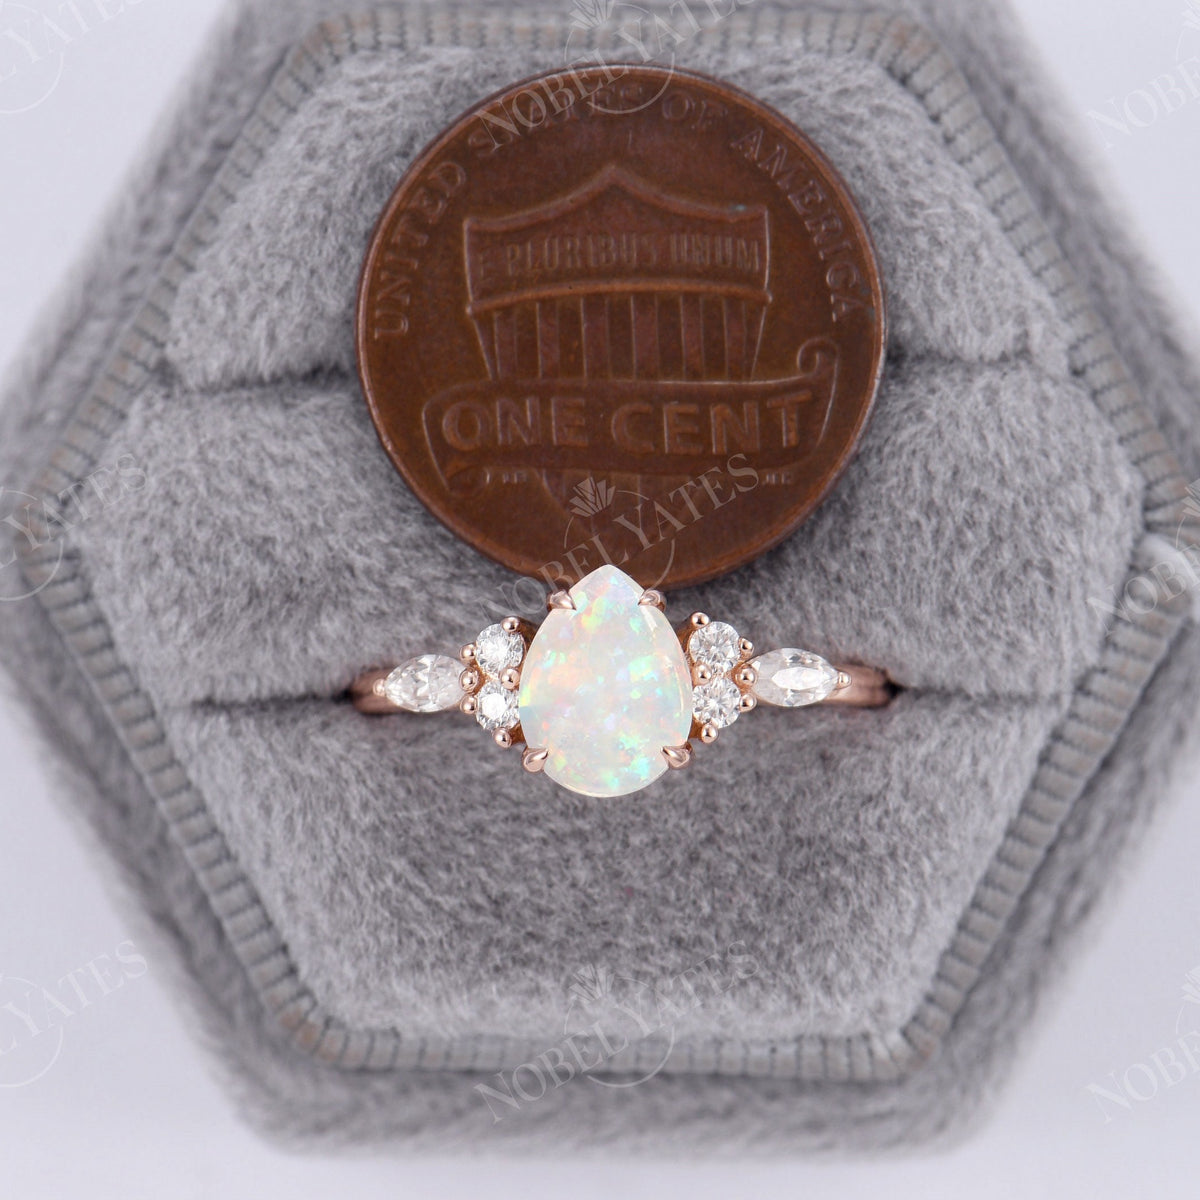 Pear White Opal Side Stone Engagement Ring Rose Gold